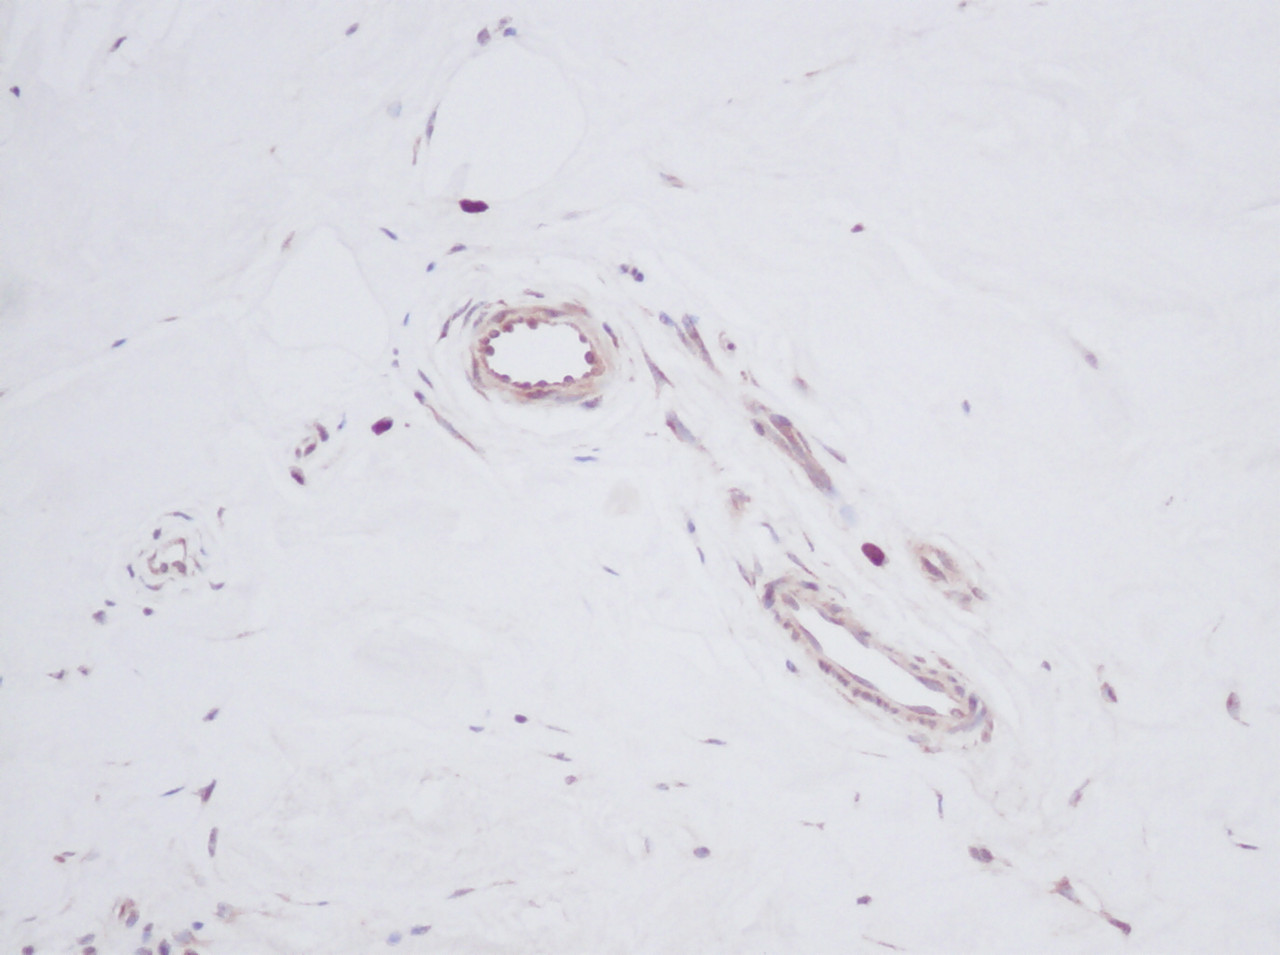 This antibody stained formalin-fixed, paraffin-embedded sections of human breast invasive ductal carcinoma. The recommended concentration is 0.5 ug/ml with a two-hour incubation at room temperature. An HRP-labeled polymer detection system was used with a DAB chromogen. Heat induced antigen retrieval with a pH 6.0 Sodium Citrate buffer is recommended. Optimal concentrations and conditions may vary.